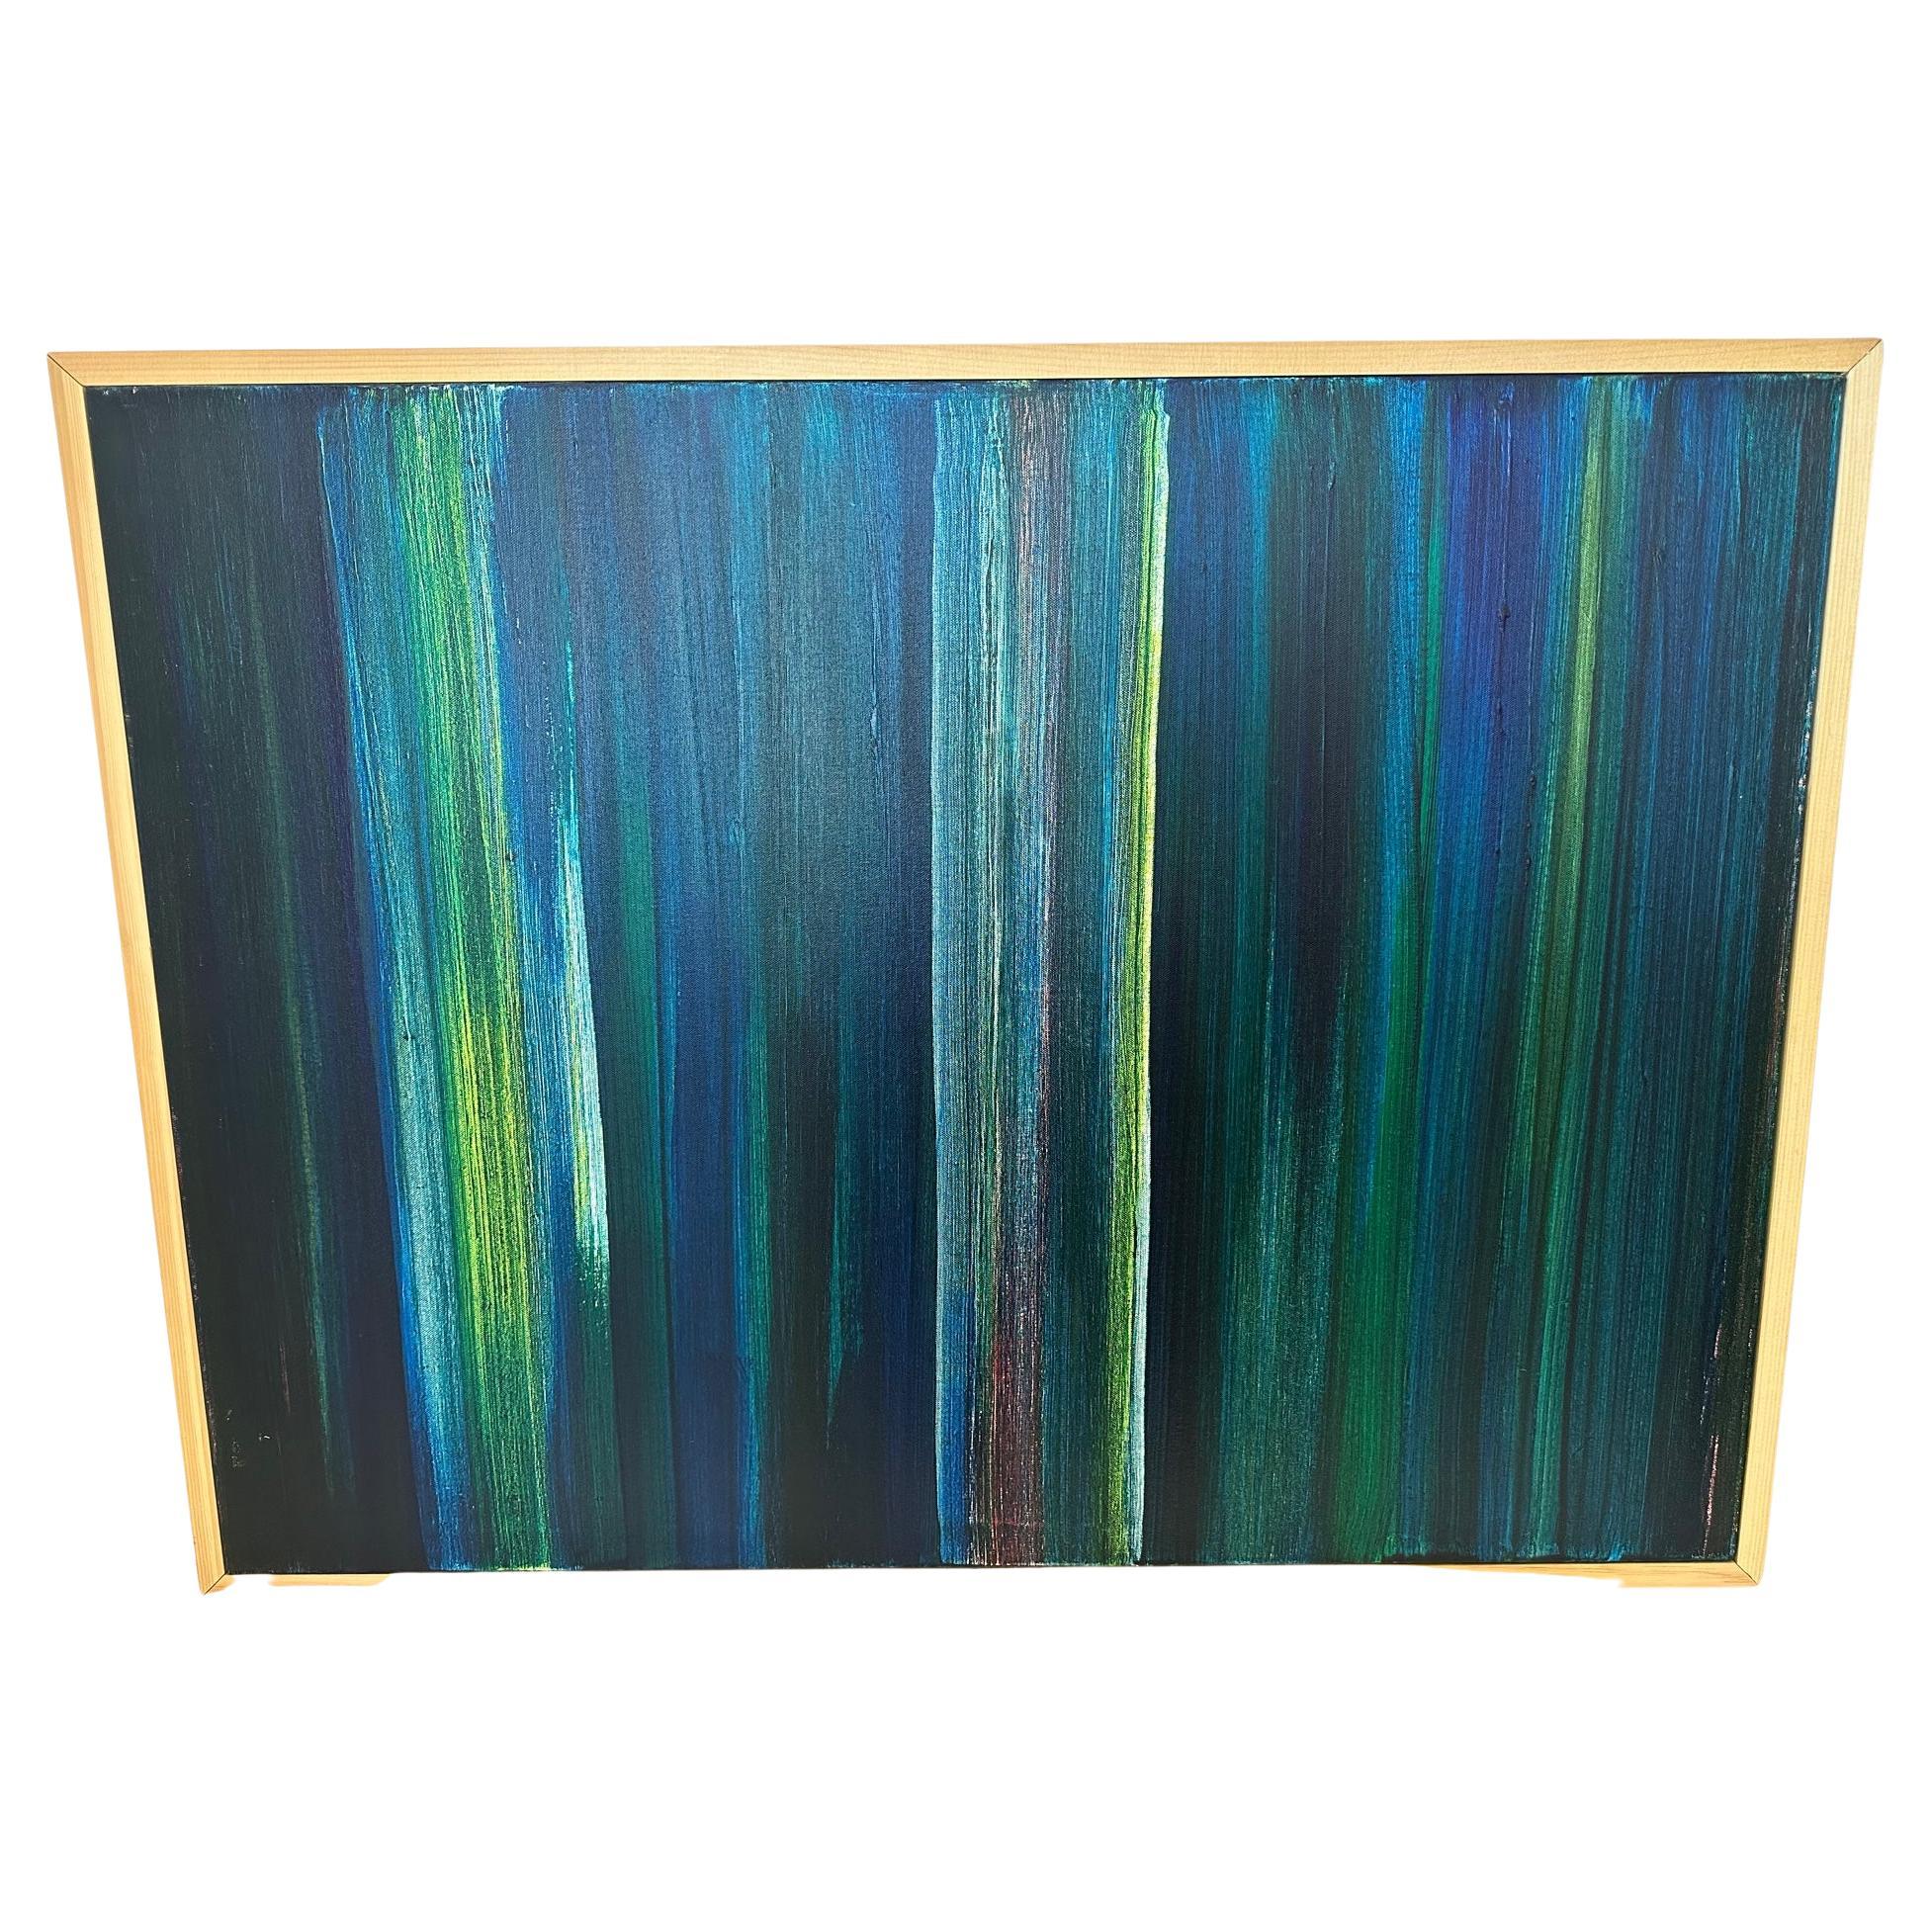 Contemporary Abstract Striped Painting in Blues & Greens